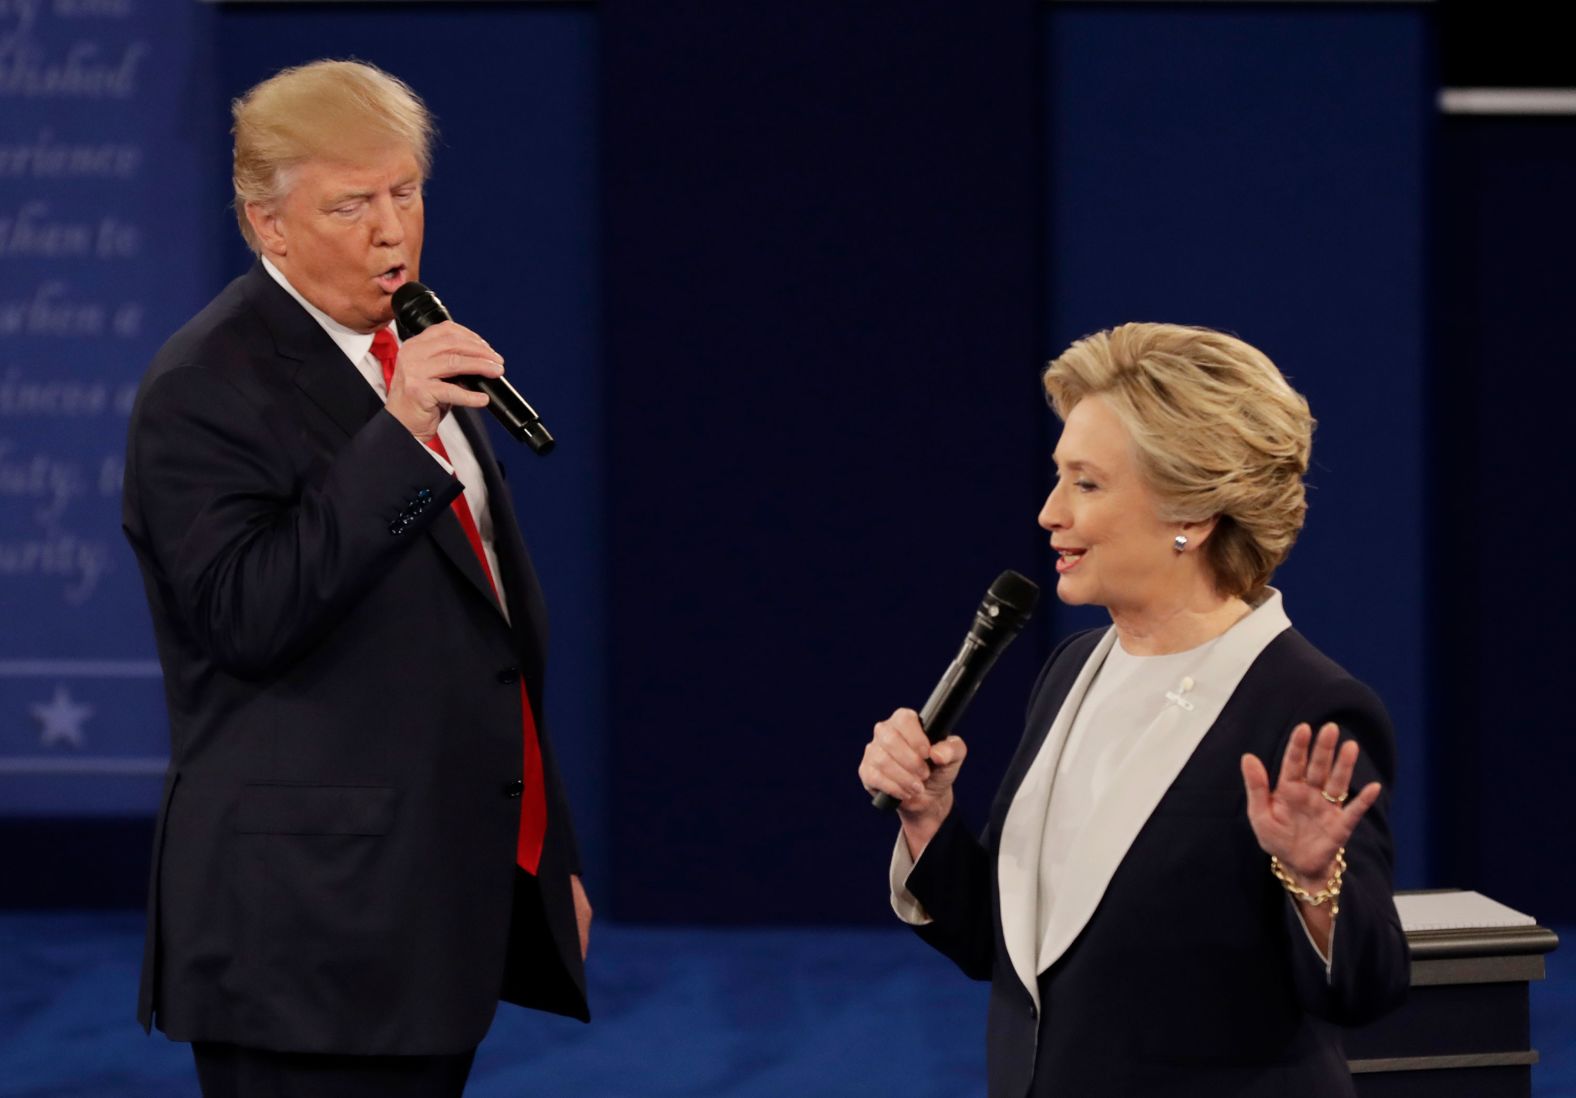 Trump and Clinton take part in their second presidential debate in 2016.